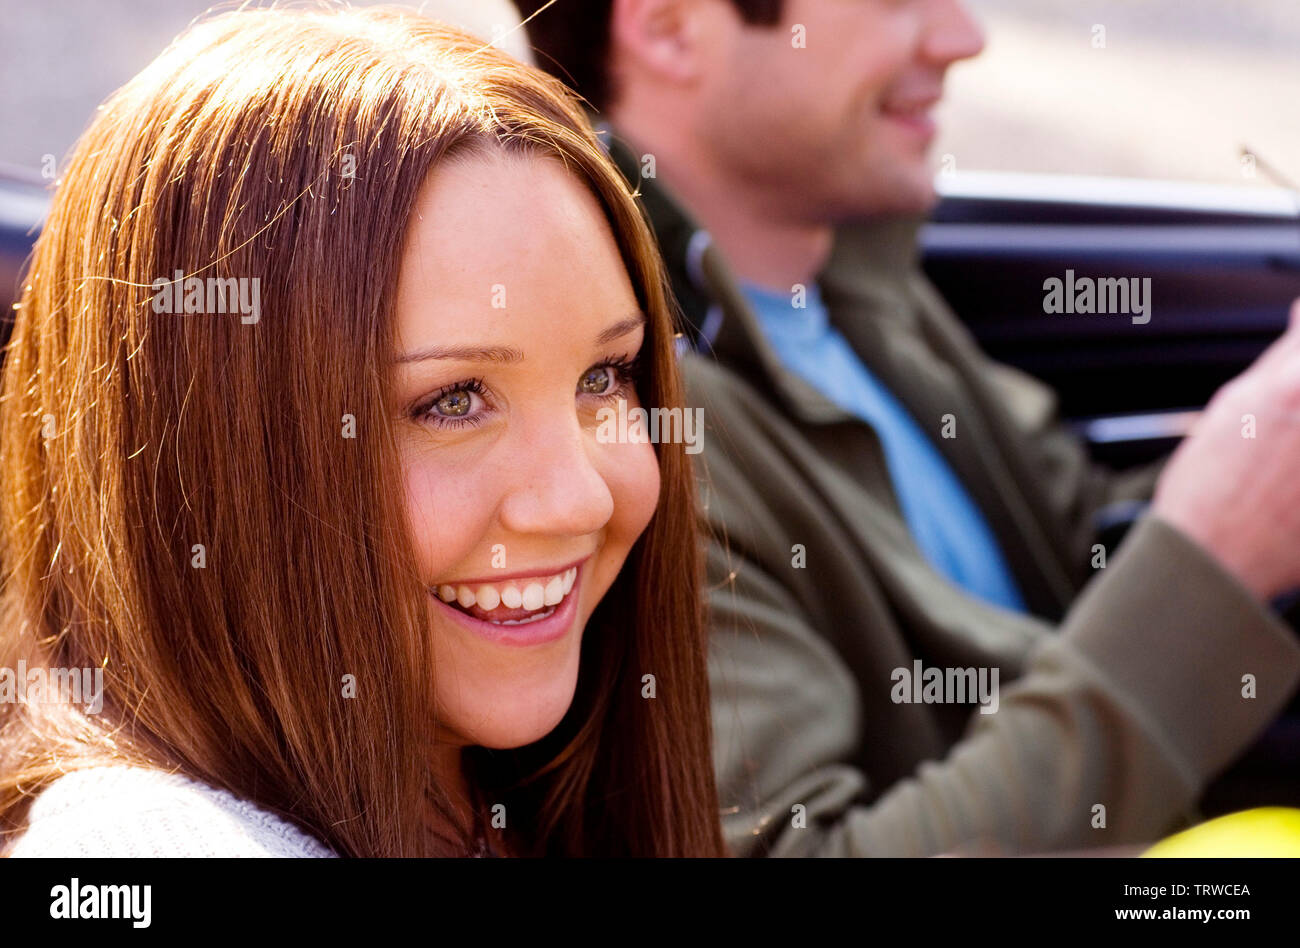 AMANDA BYNES and MATT LONG in SYDNEY WHITE (2007). Copyright: Editorial use only. No merchandising or book covers. This is a publicly distributed handout. Access rights only, no license of copyright provided. Only to be reproduced in conjunction with promotion of this film. Credit: MORGAN CREEK PROD./SW7D PROD./CLIFFORD WERBER PROD. / Album Stock Photo